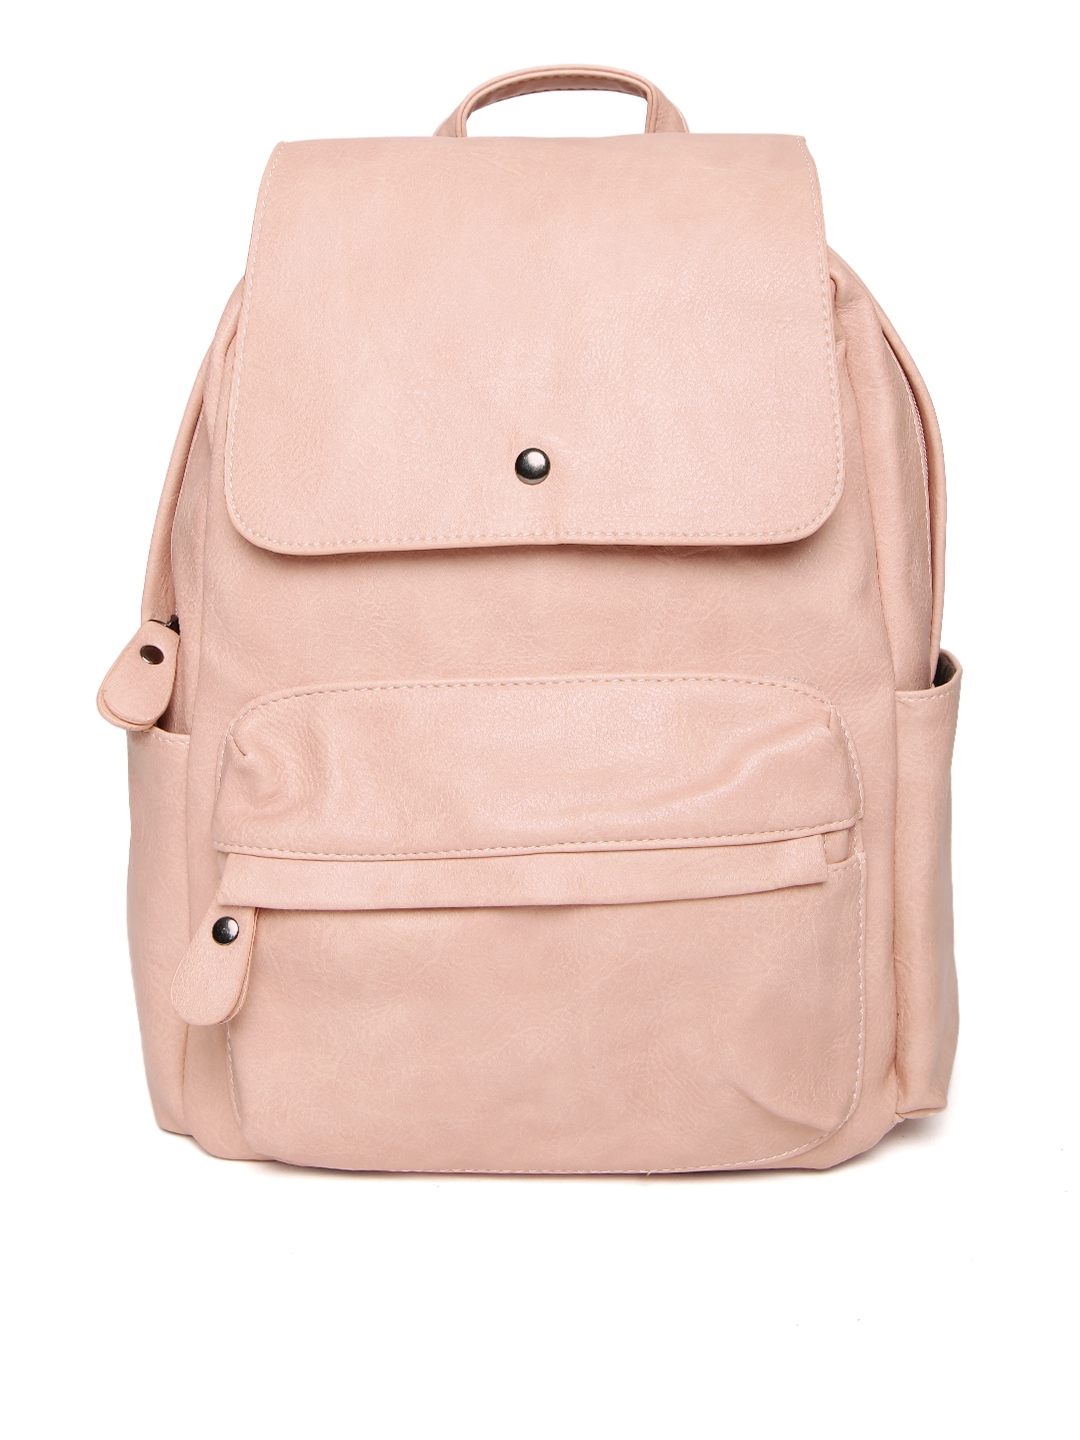 Mast & Harbour Women Peach-Coloured Backpack Price in India